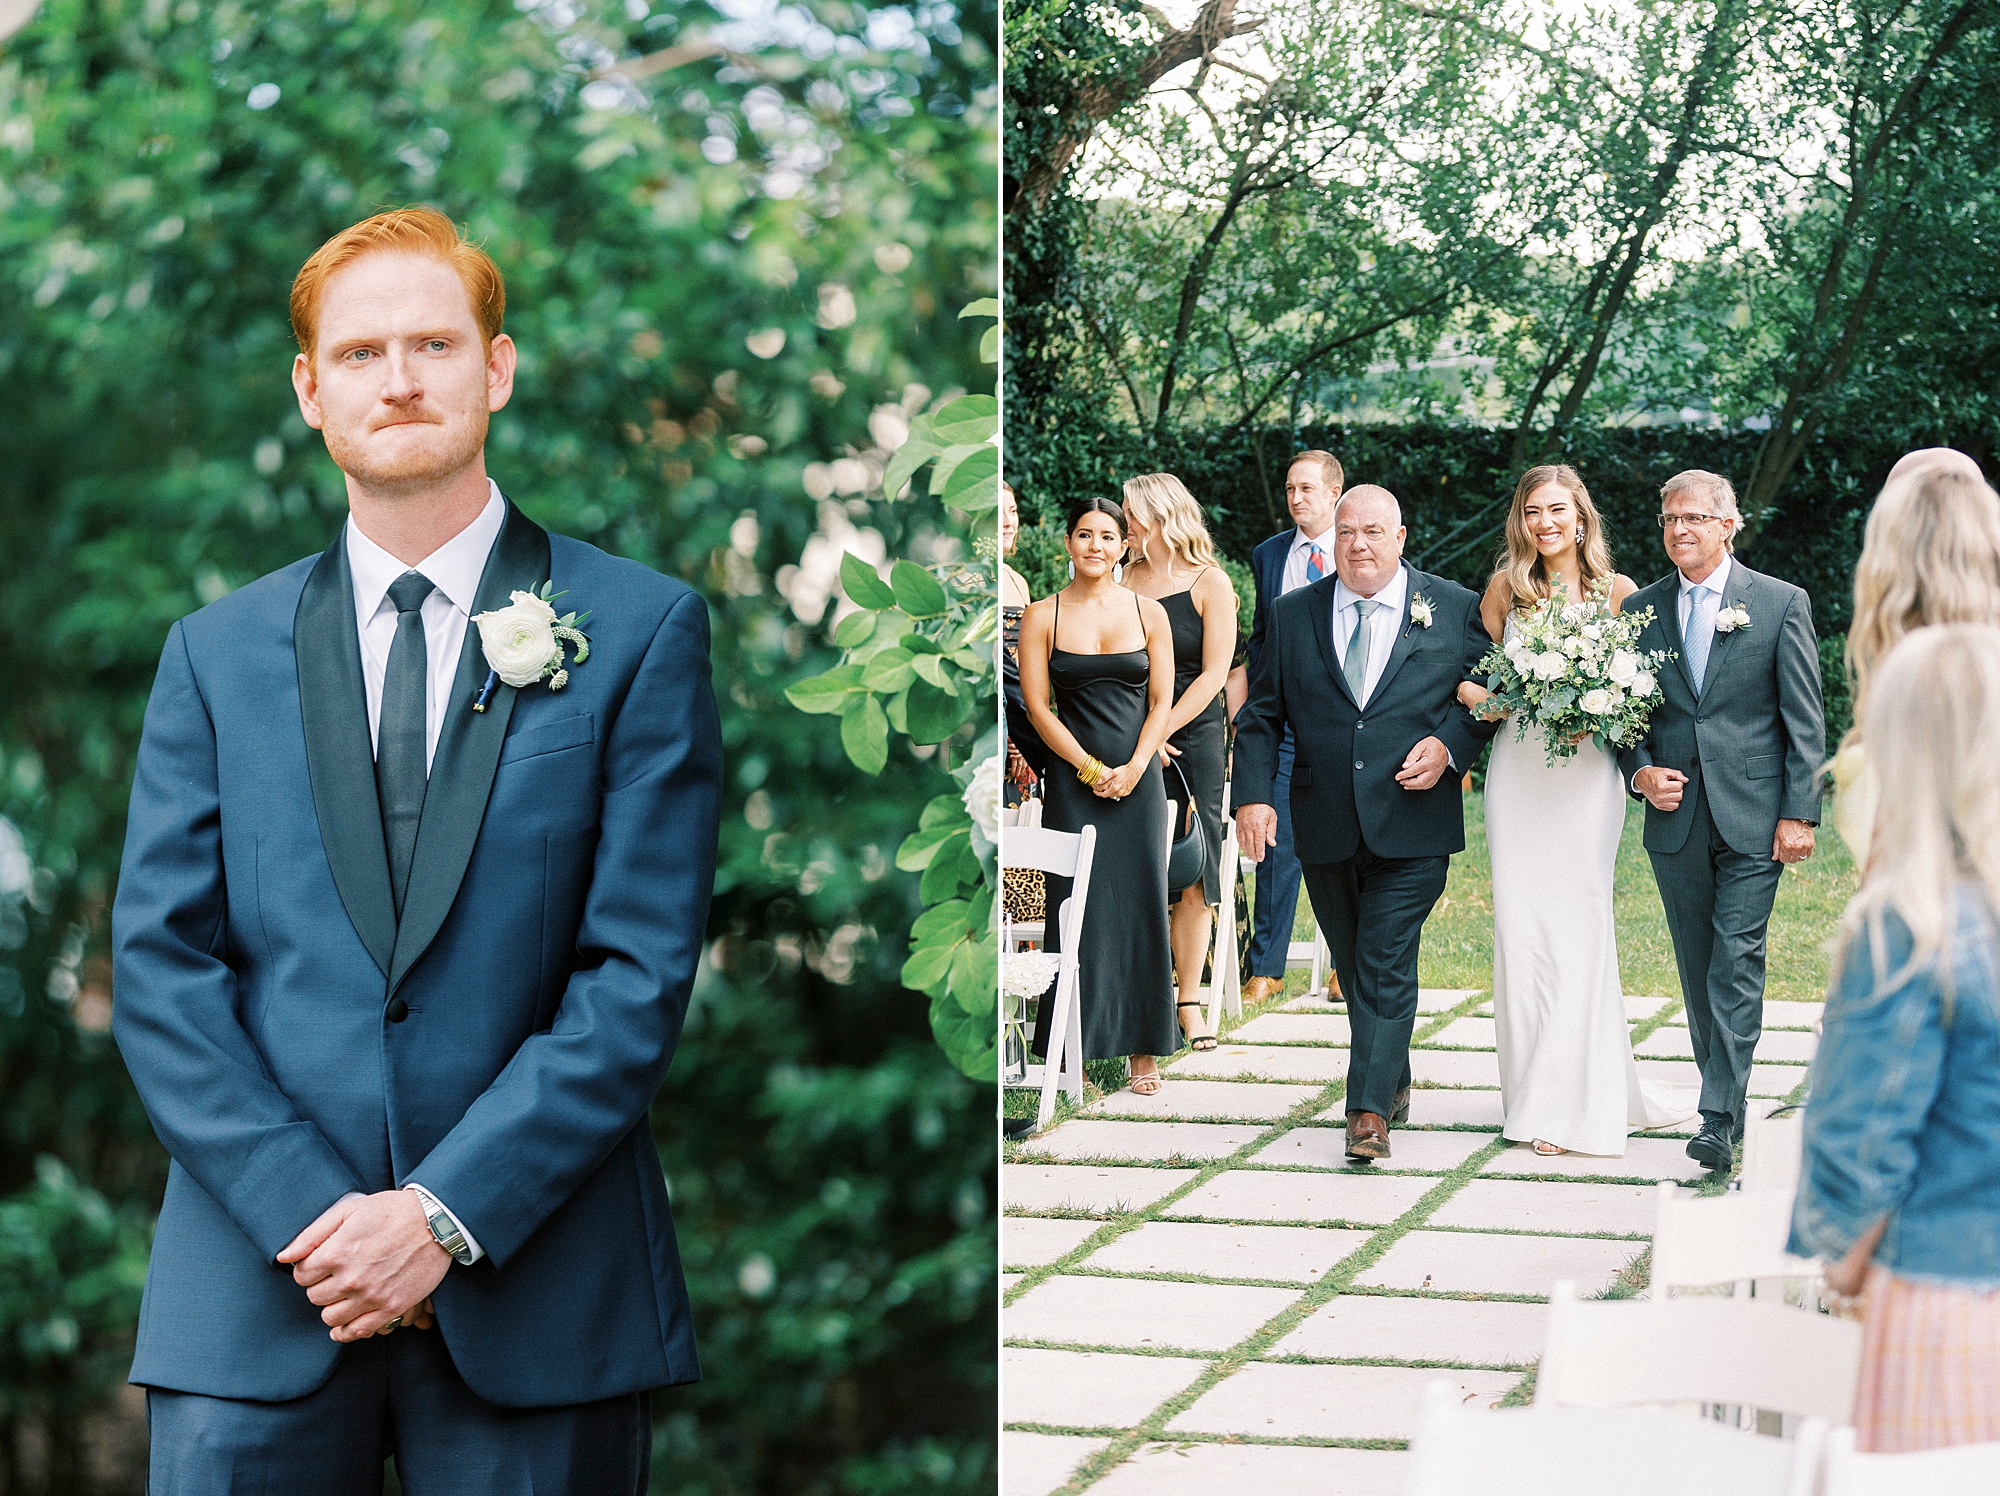 groom in navy suit watches bride walk down aisle for outdoor wedding ceremony at Separk Mansion